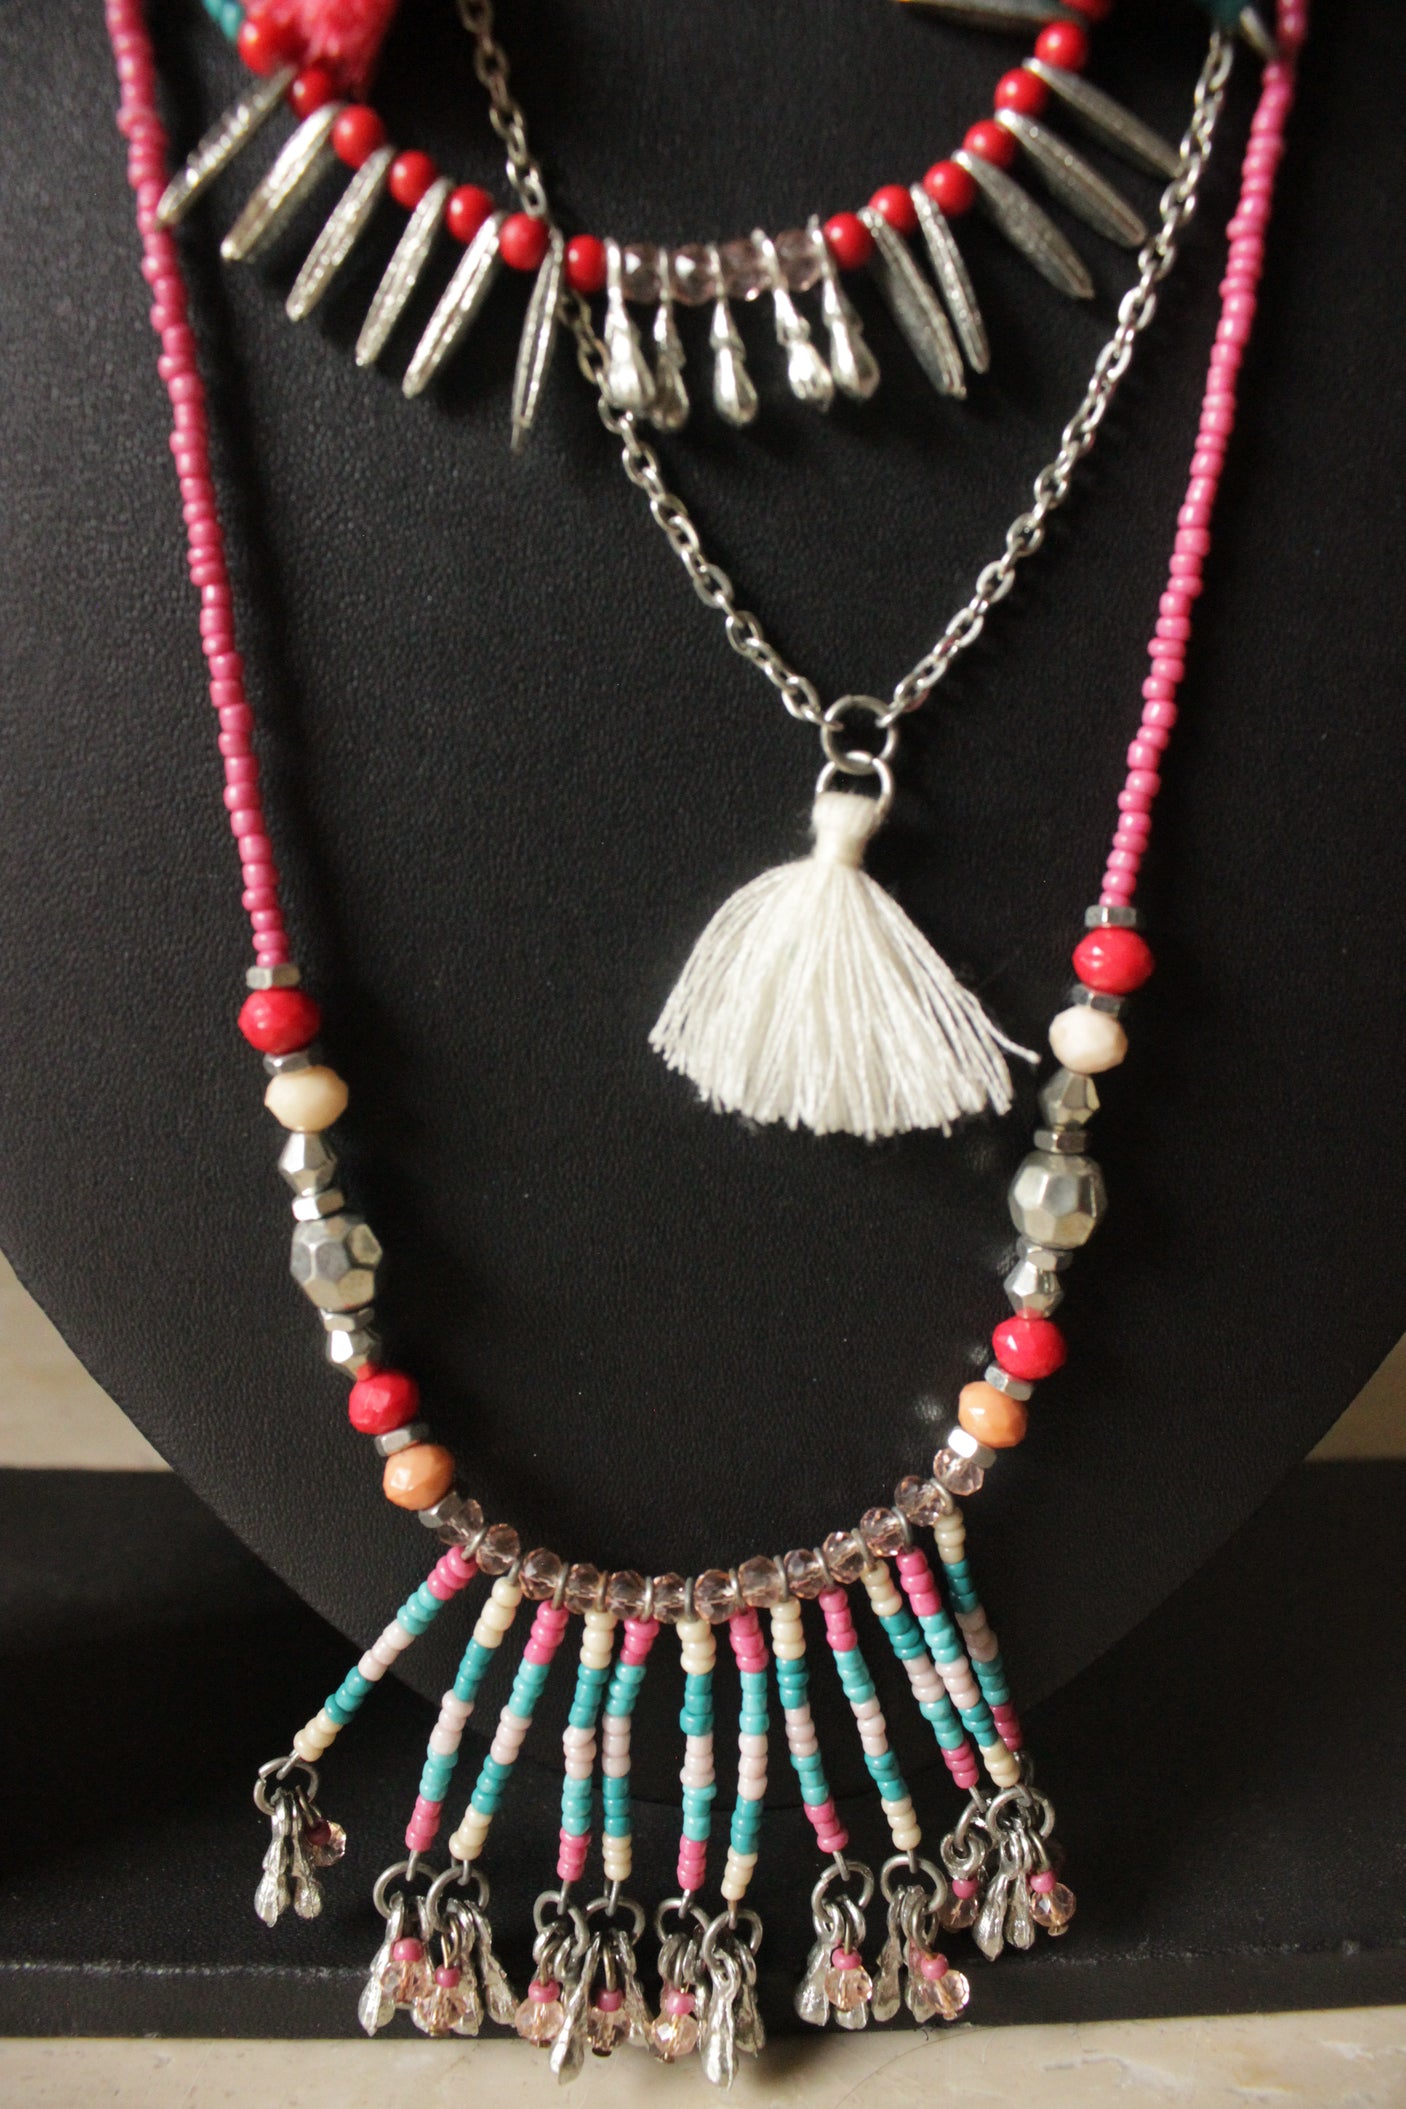 4 Layered Fabric, Beads and Metal Charms Long Necklace